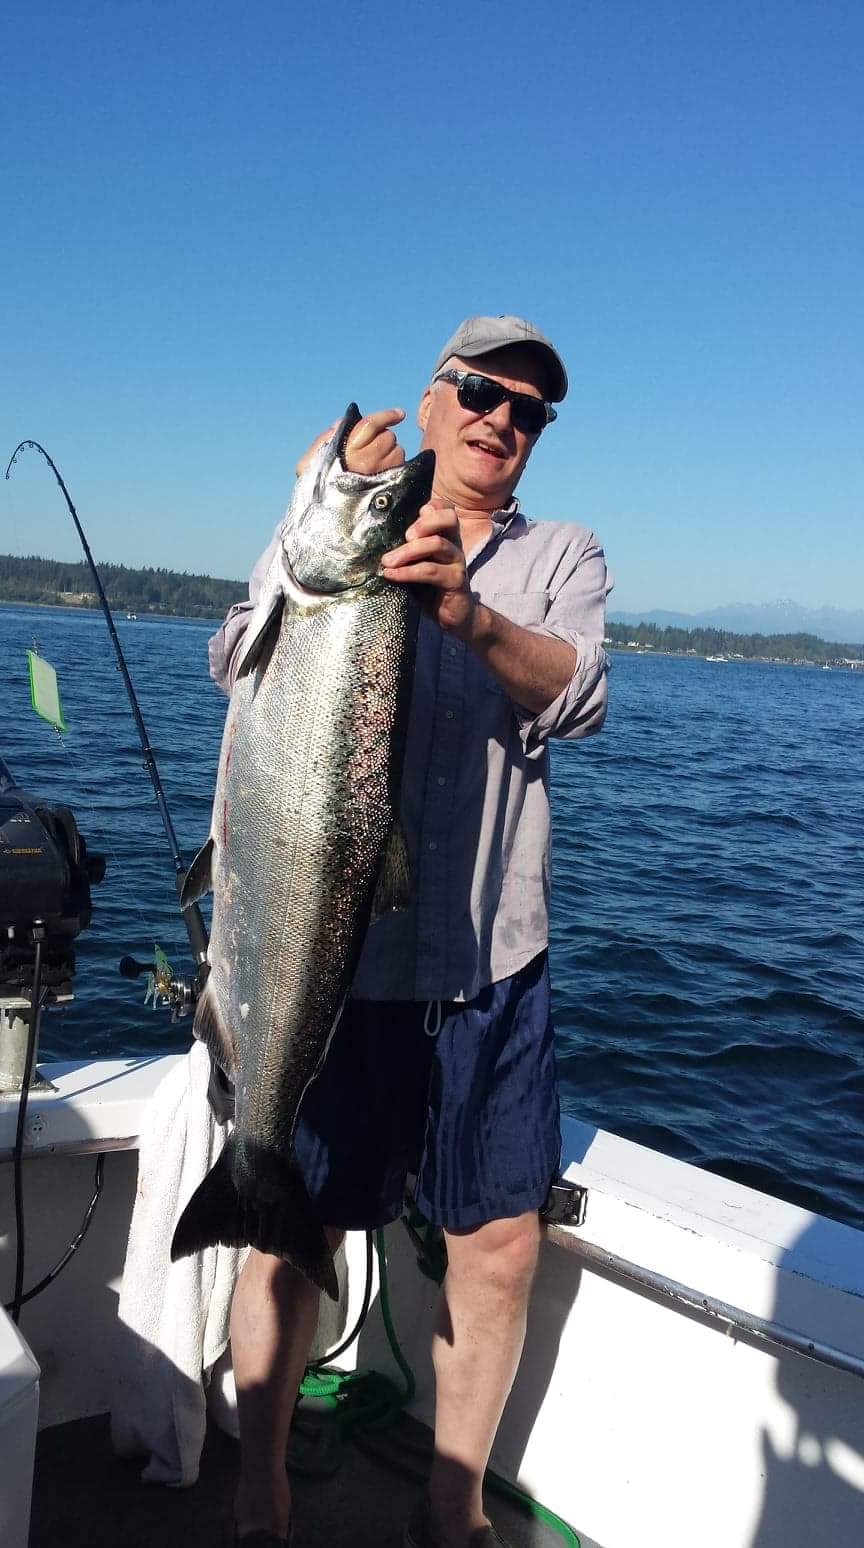 Catching salmon in the Puget Sound